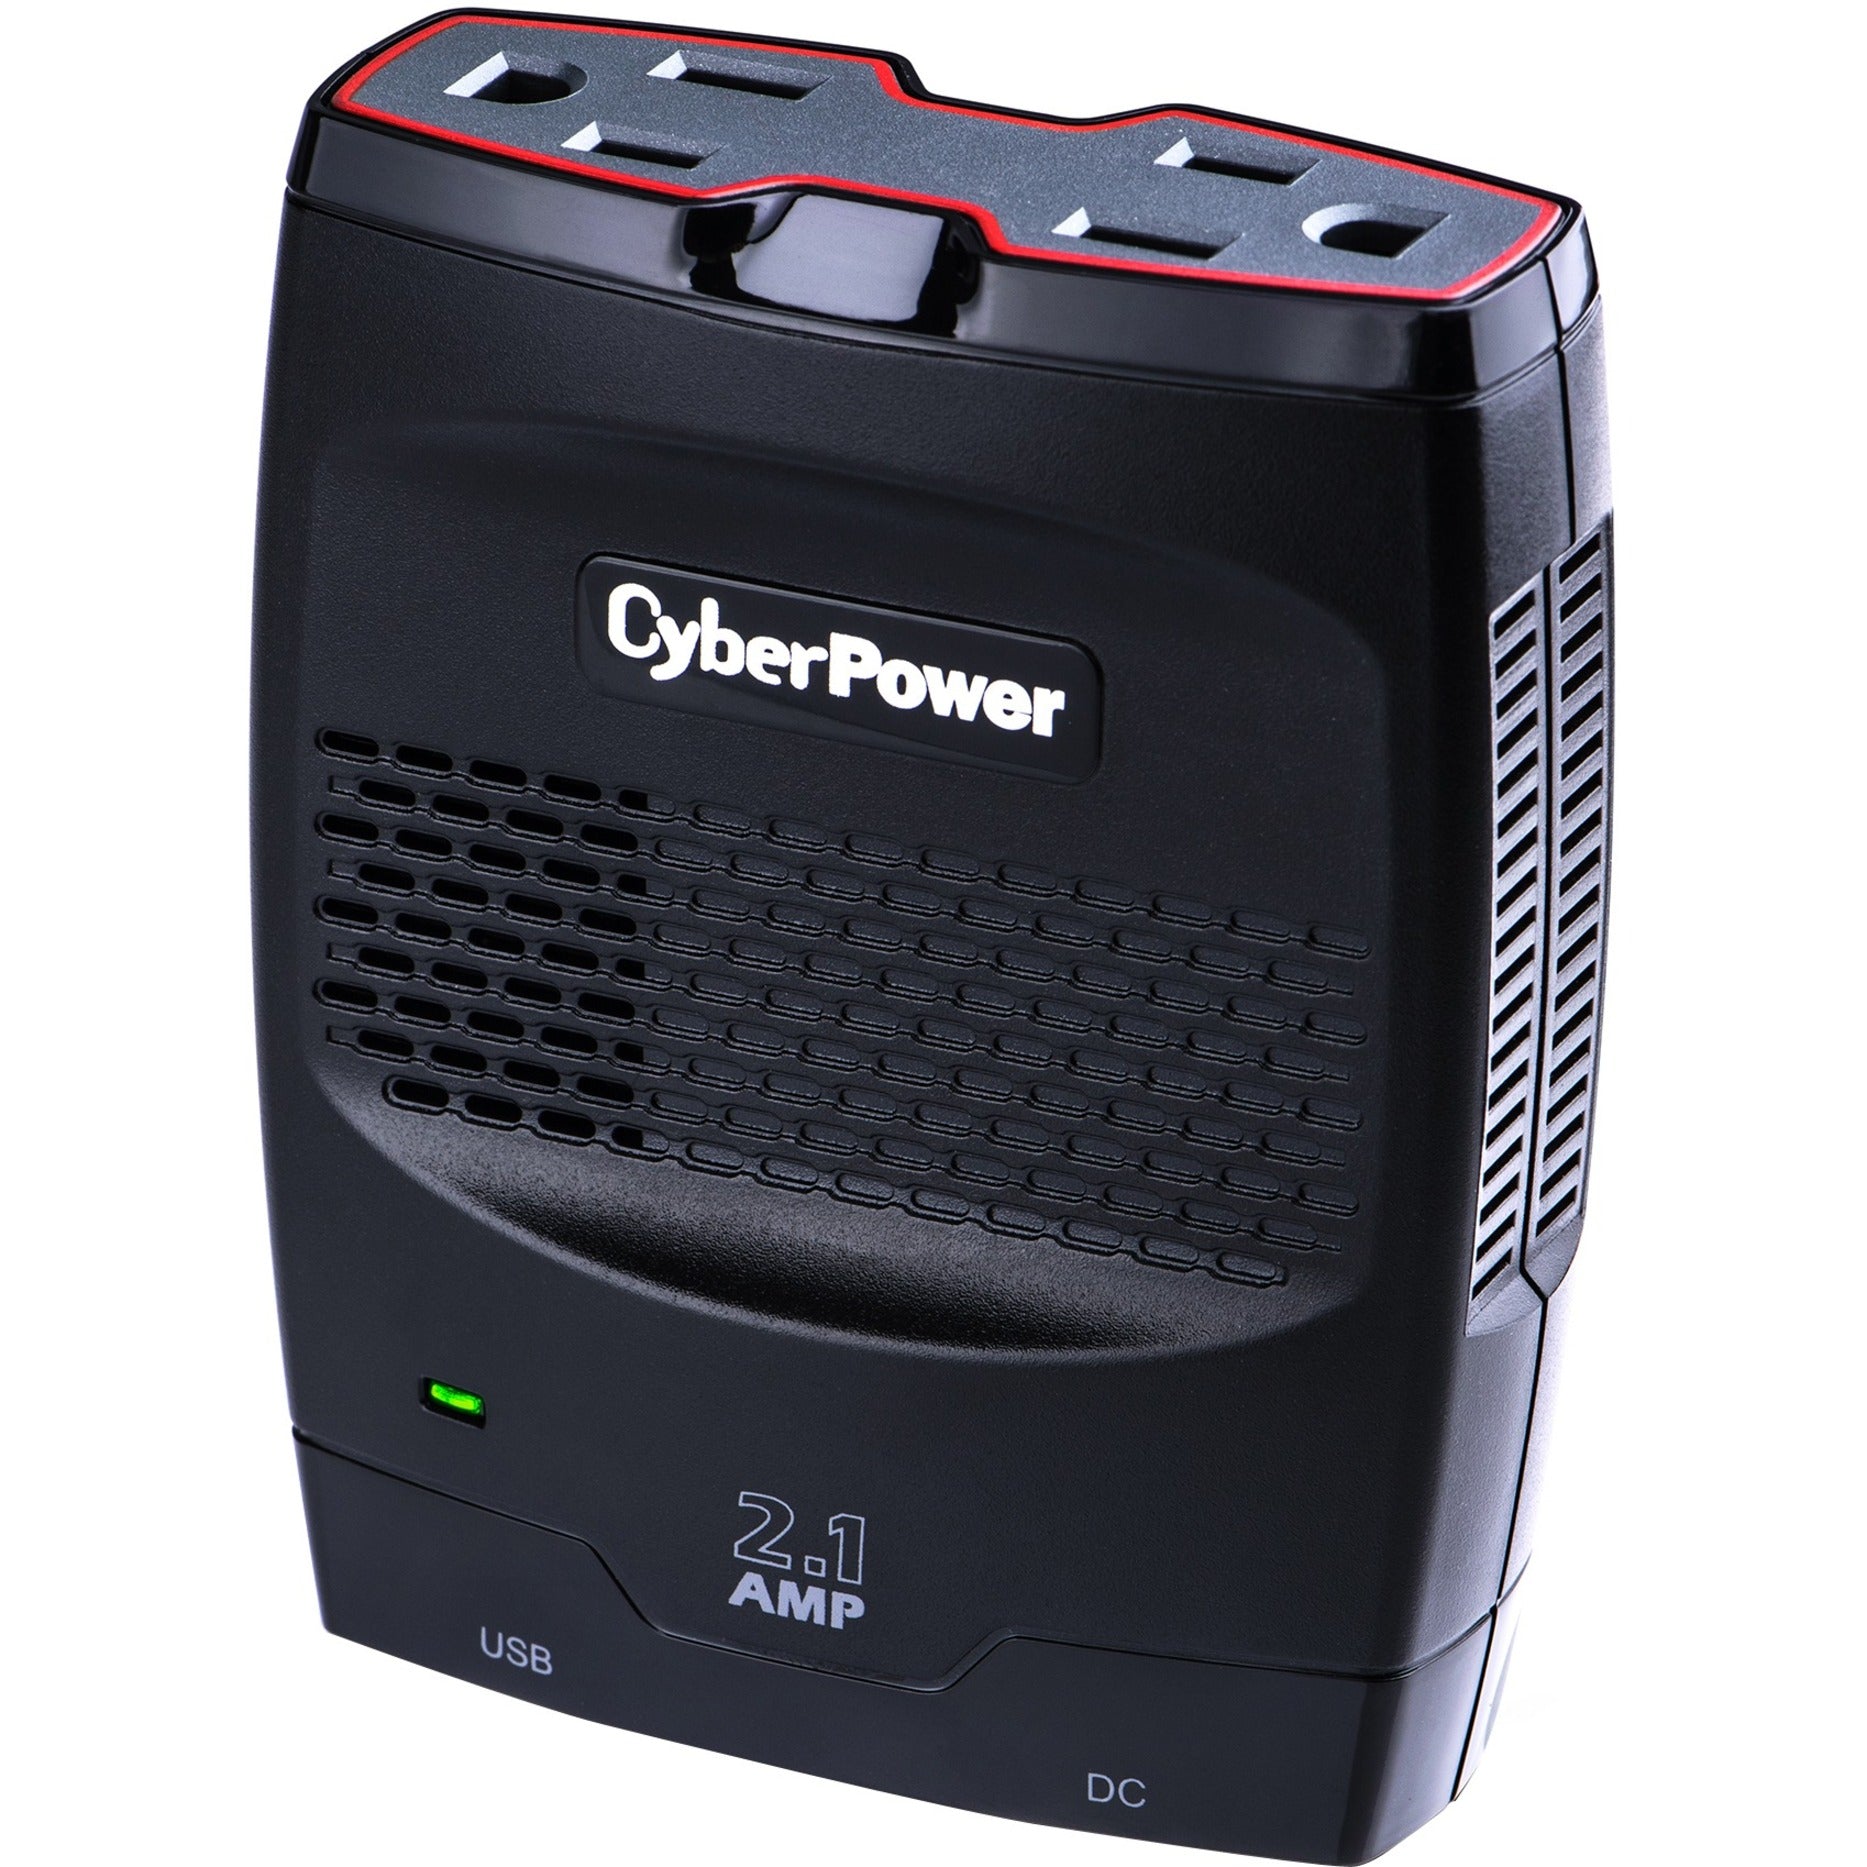 CyberPower CPS175SURC1 Mobile Power Inverter 175W with 2.1A USB Charger - Slim Line Design, 12V DC Input, 120V AC Output